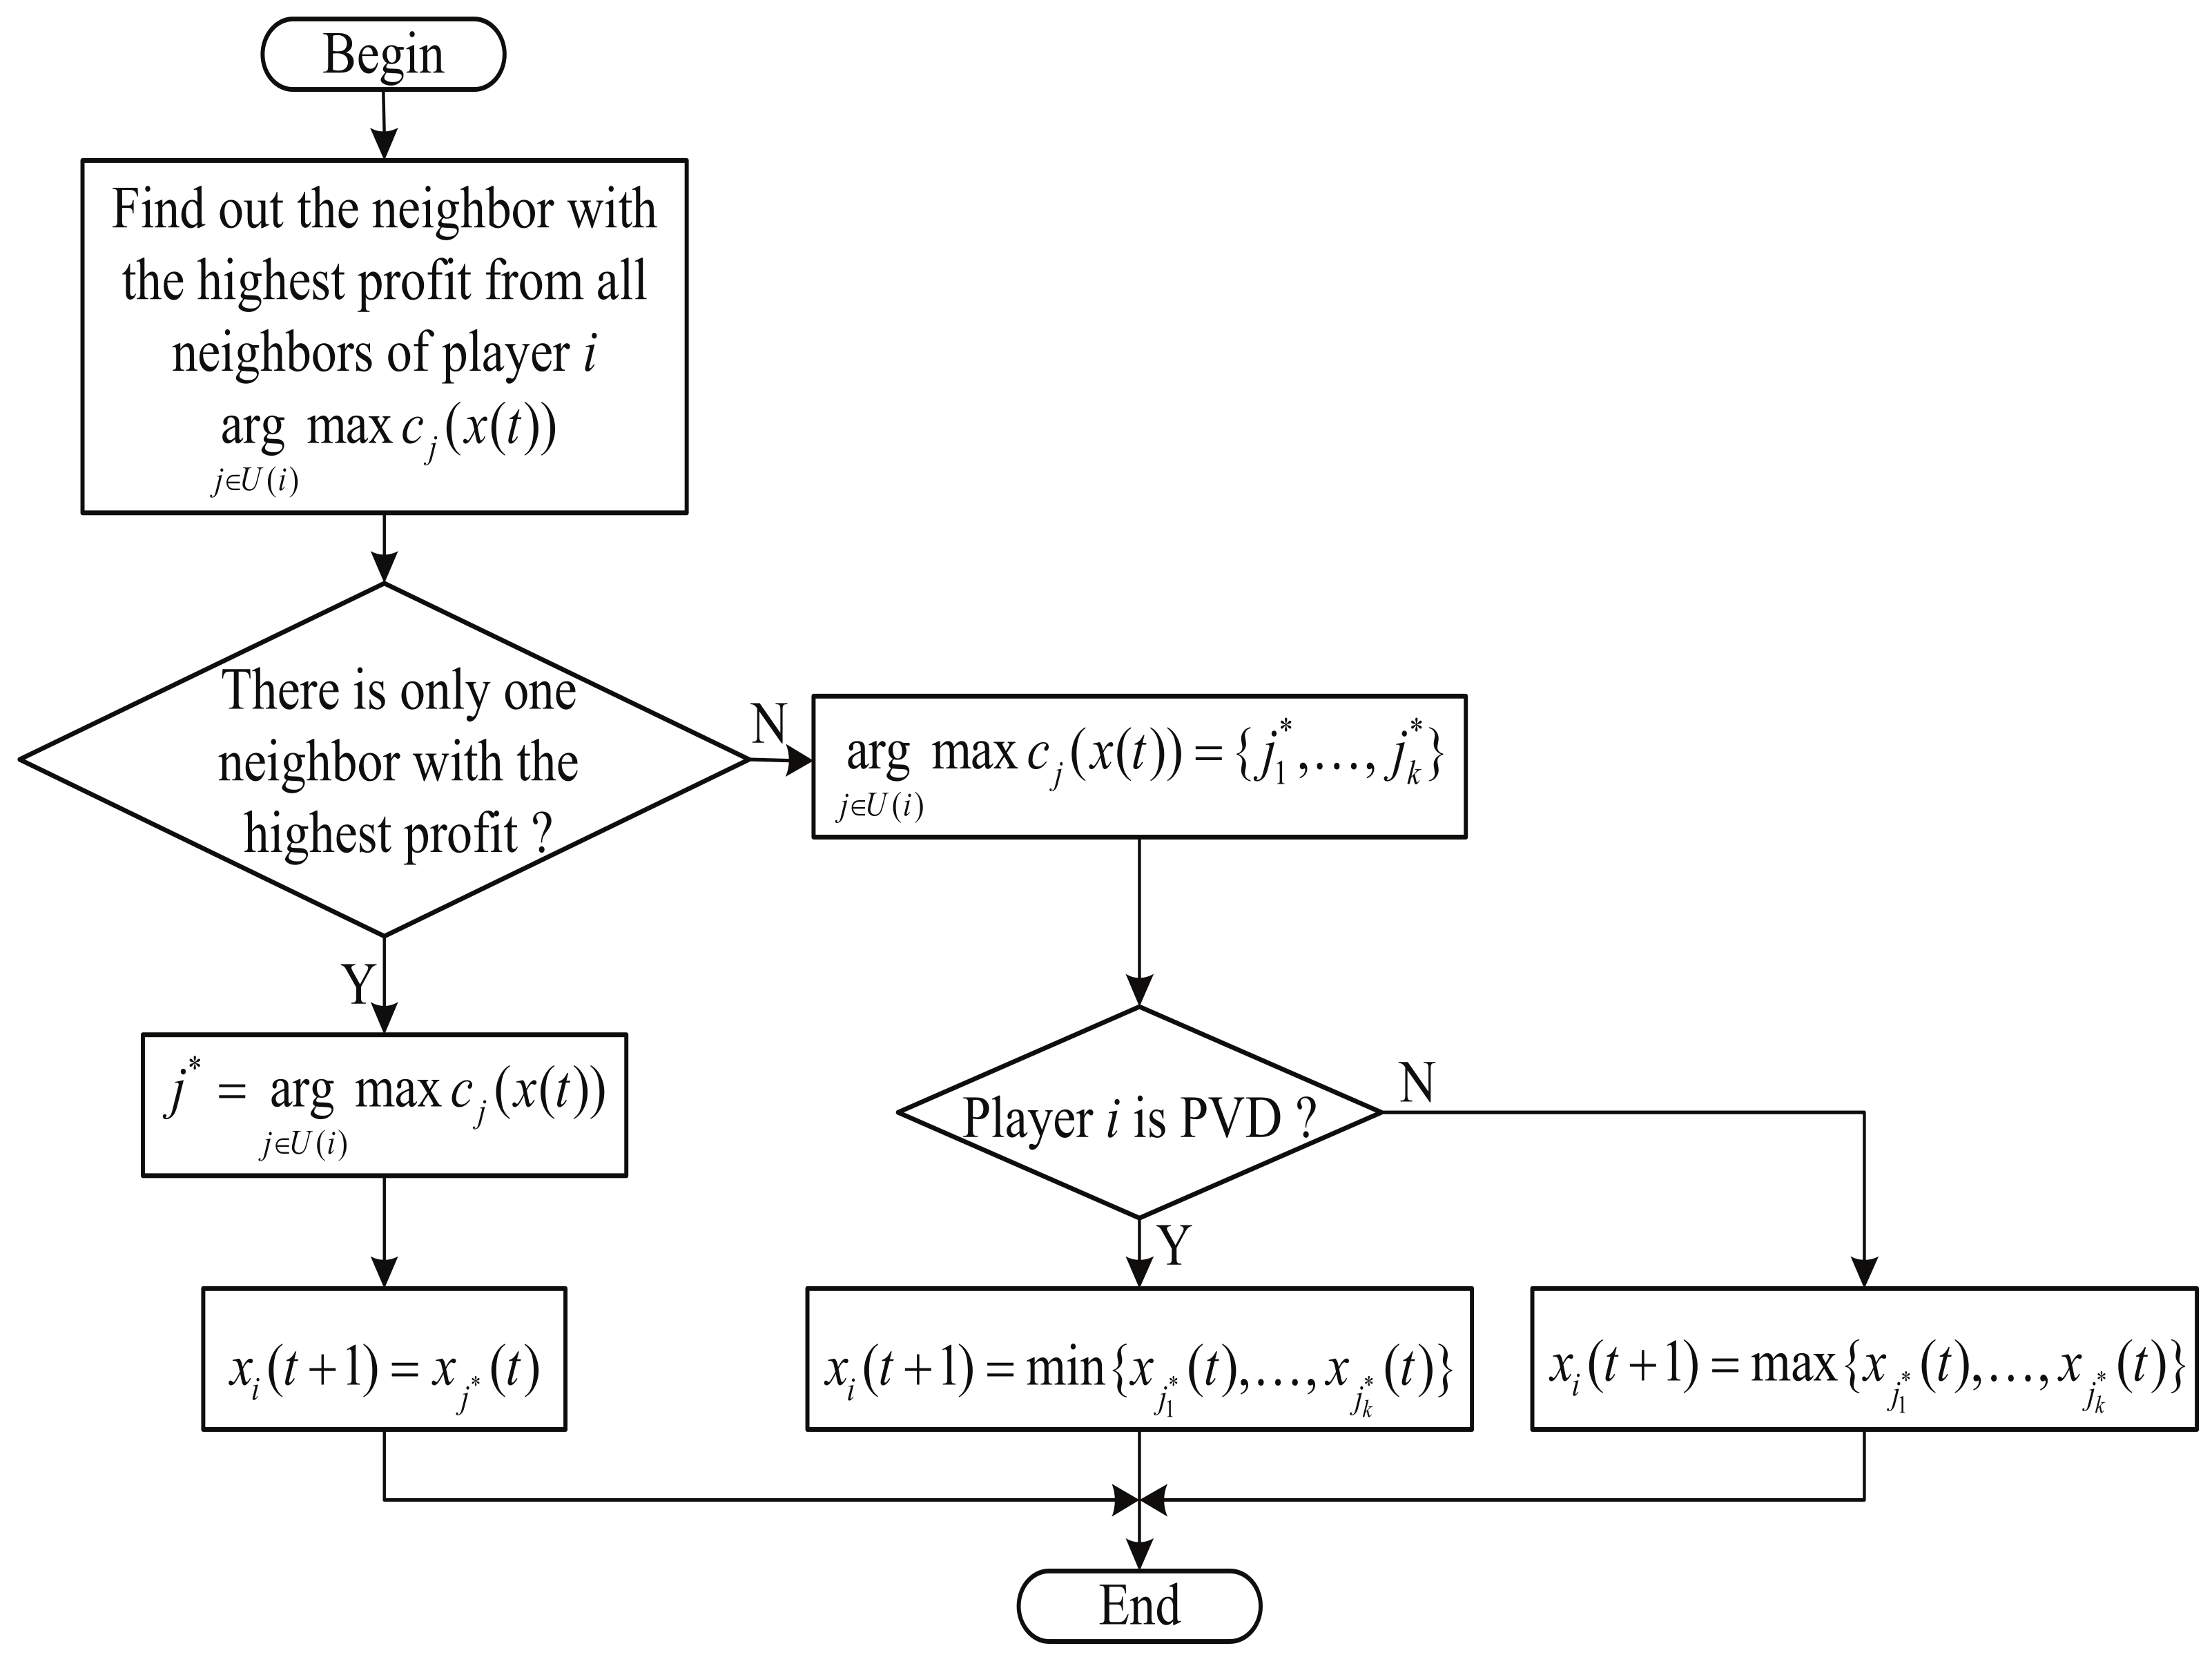 Decision relationship for master-slave game among generators and large